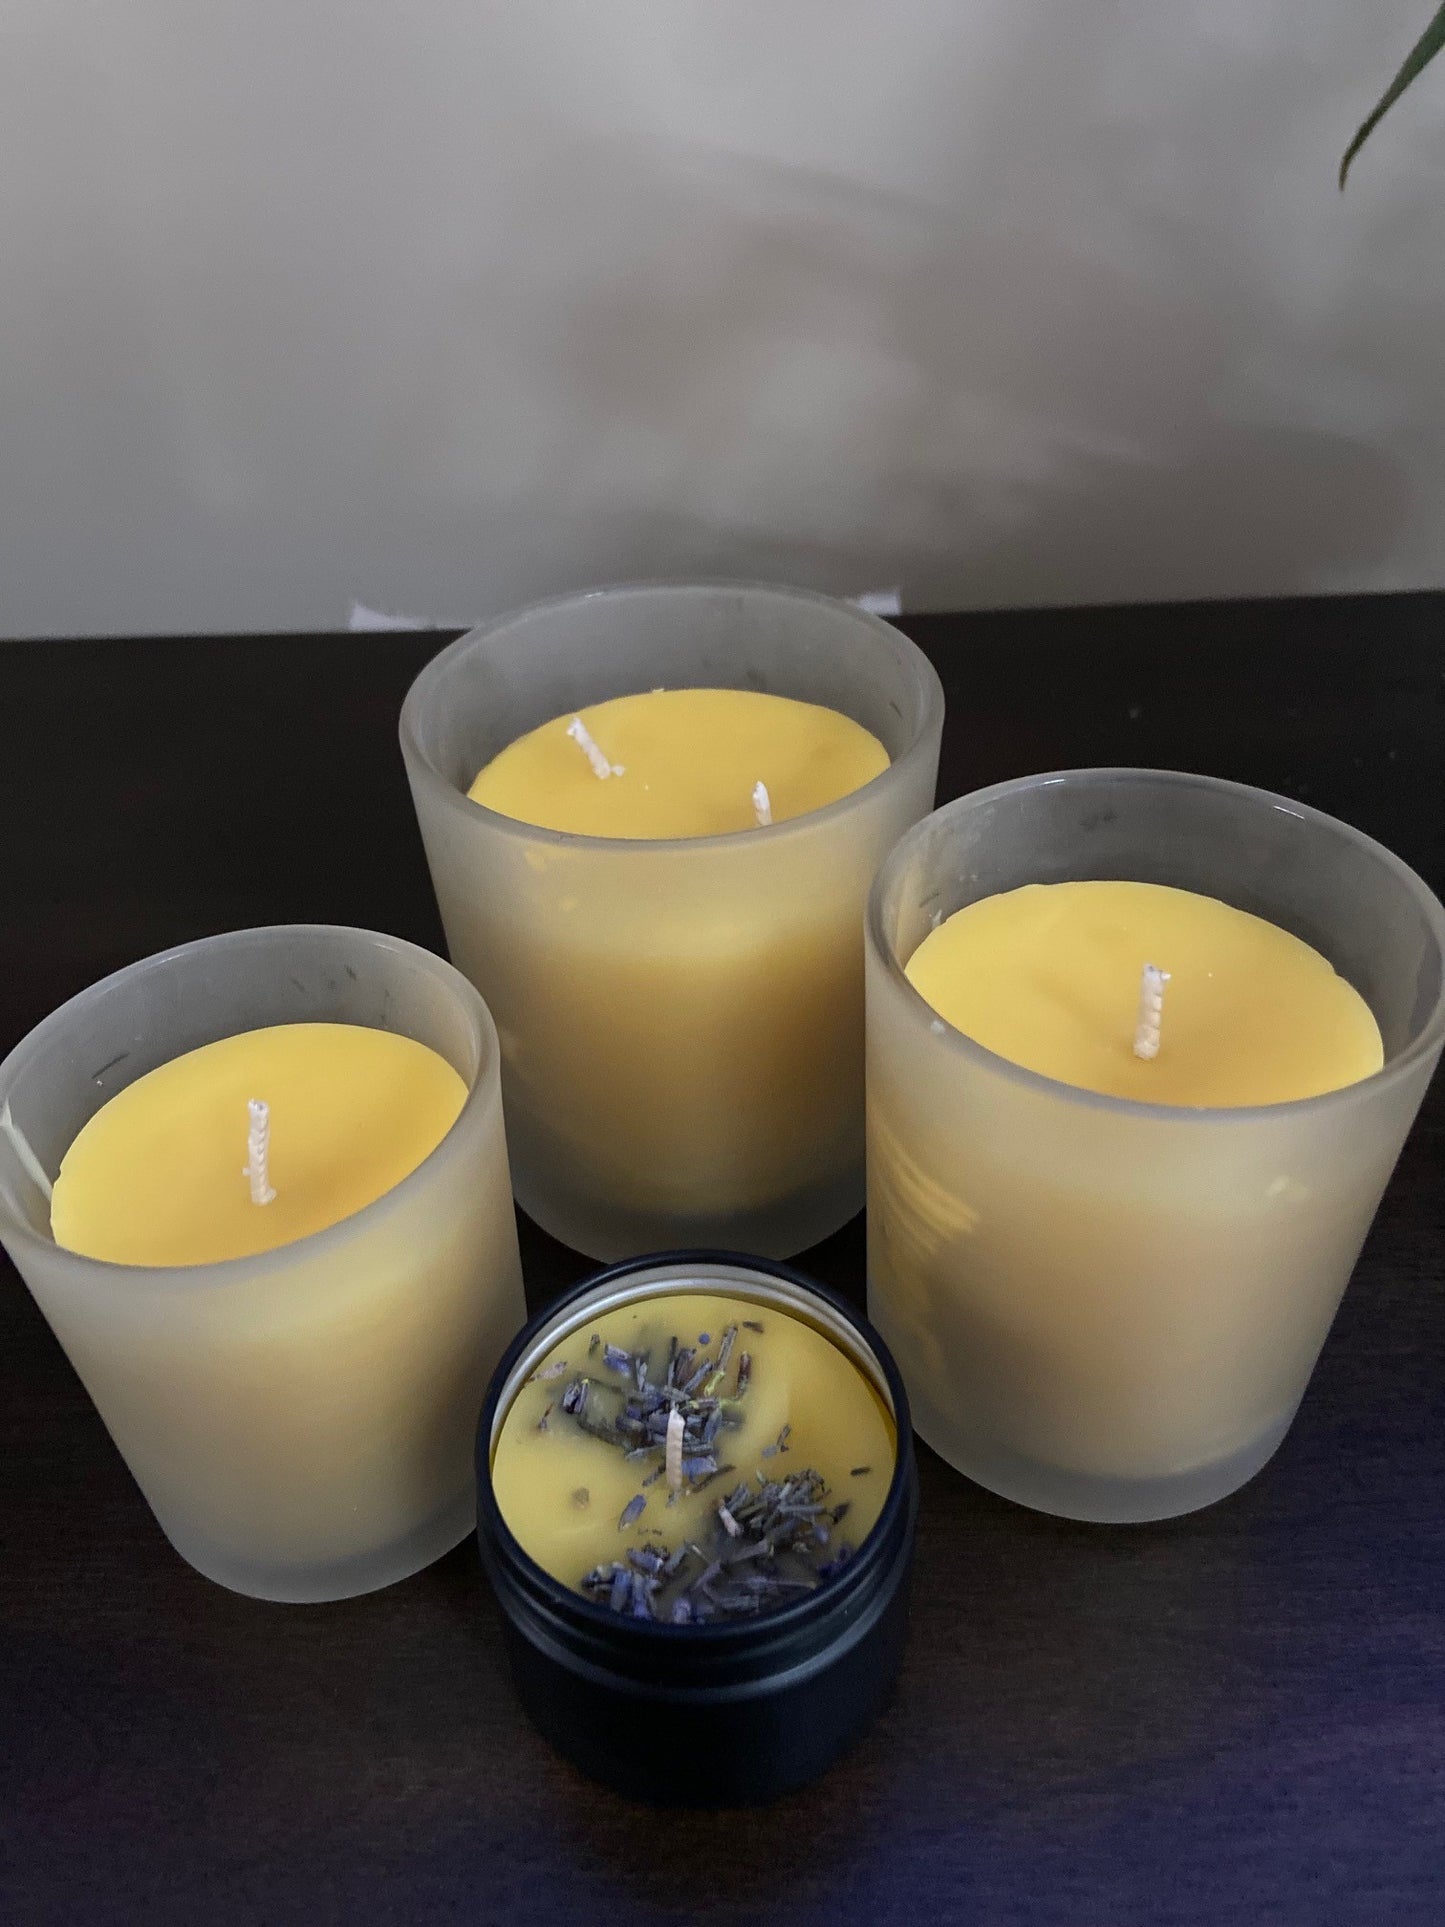 6 oz Beeswax Jar Candle-Natural and Pure, and Scented